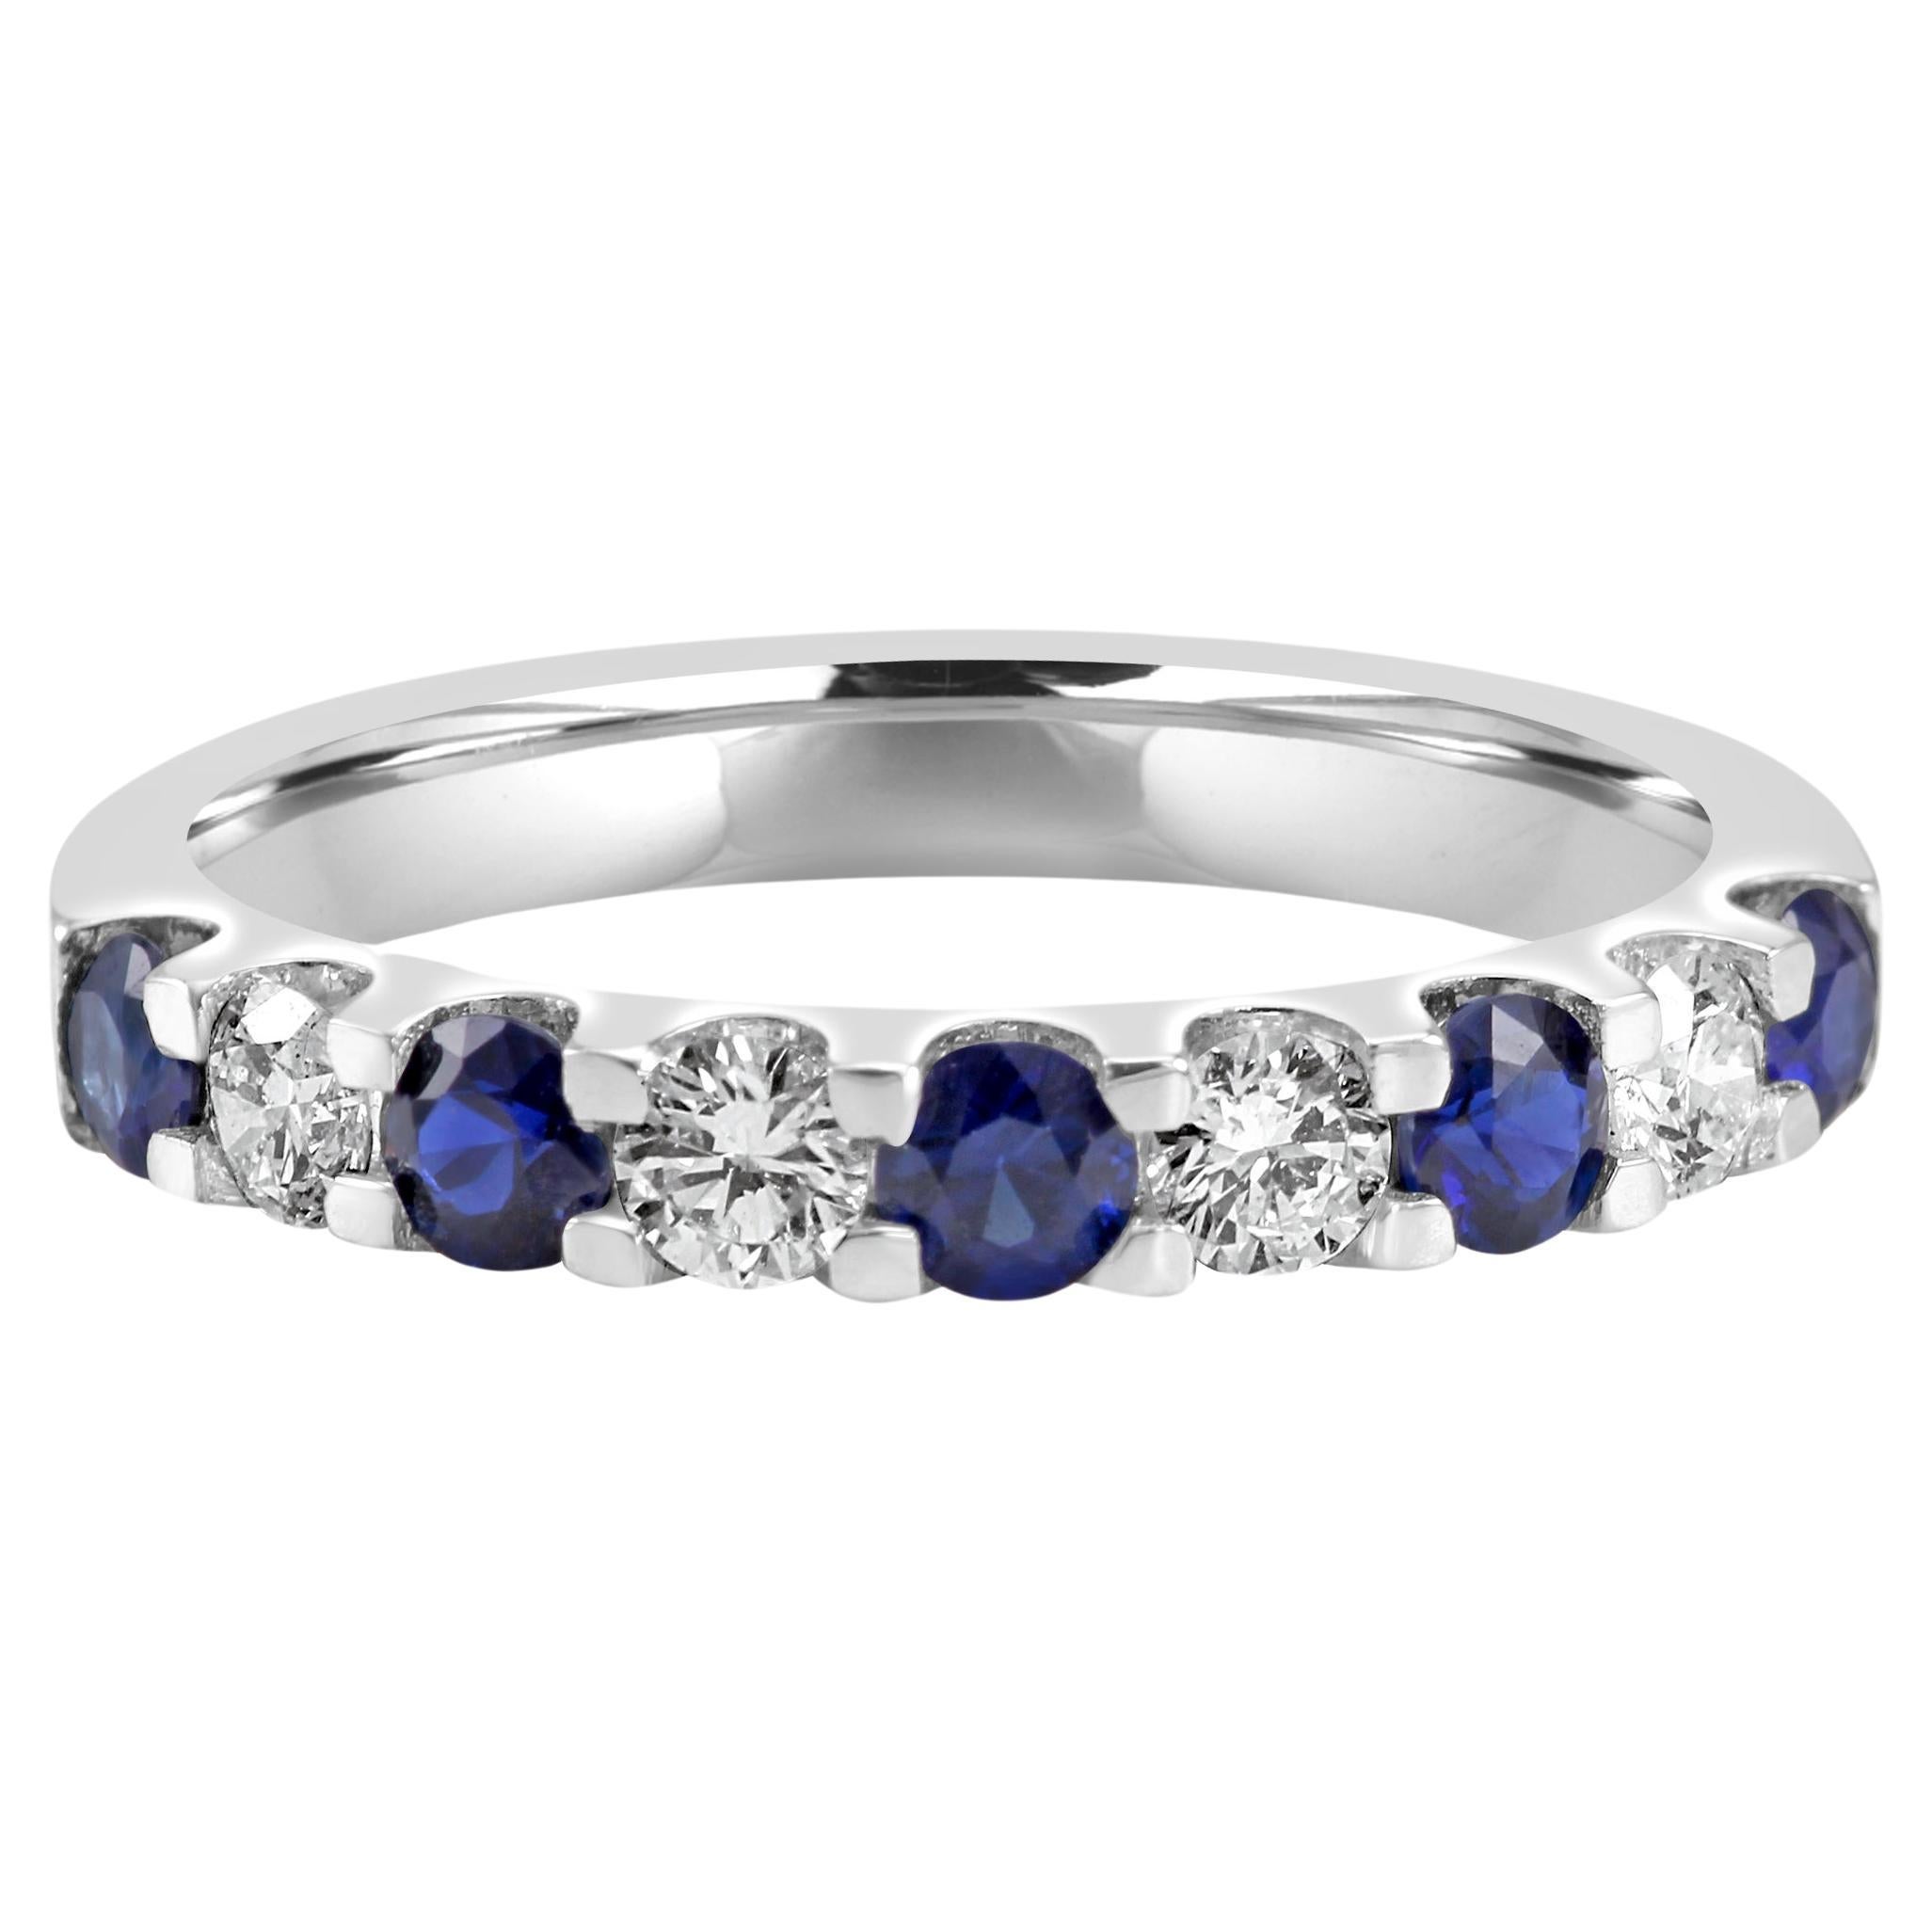 For Sale:  Blue Sapphire White Diamond Round 18K White Gold Fashion Engagement Band Ring